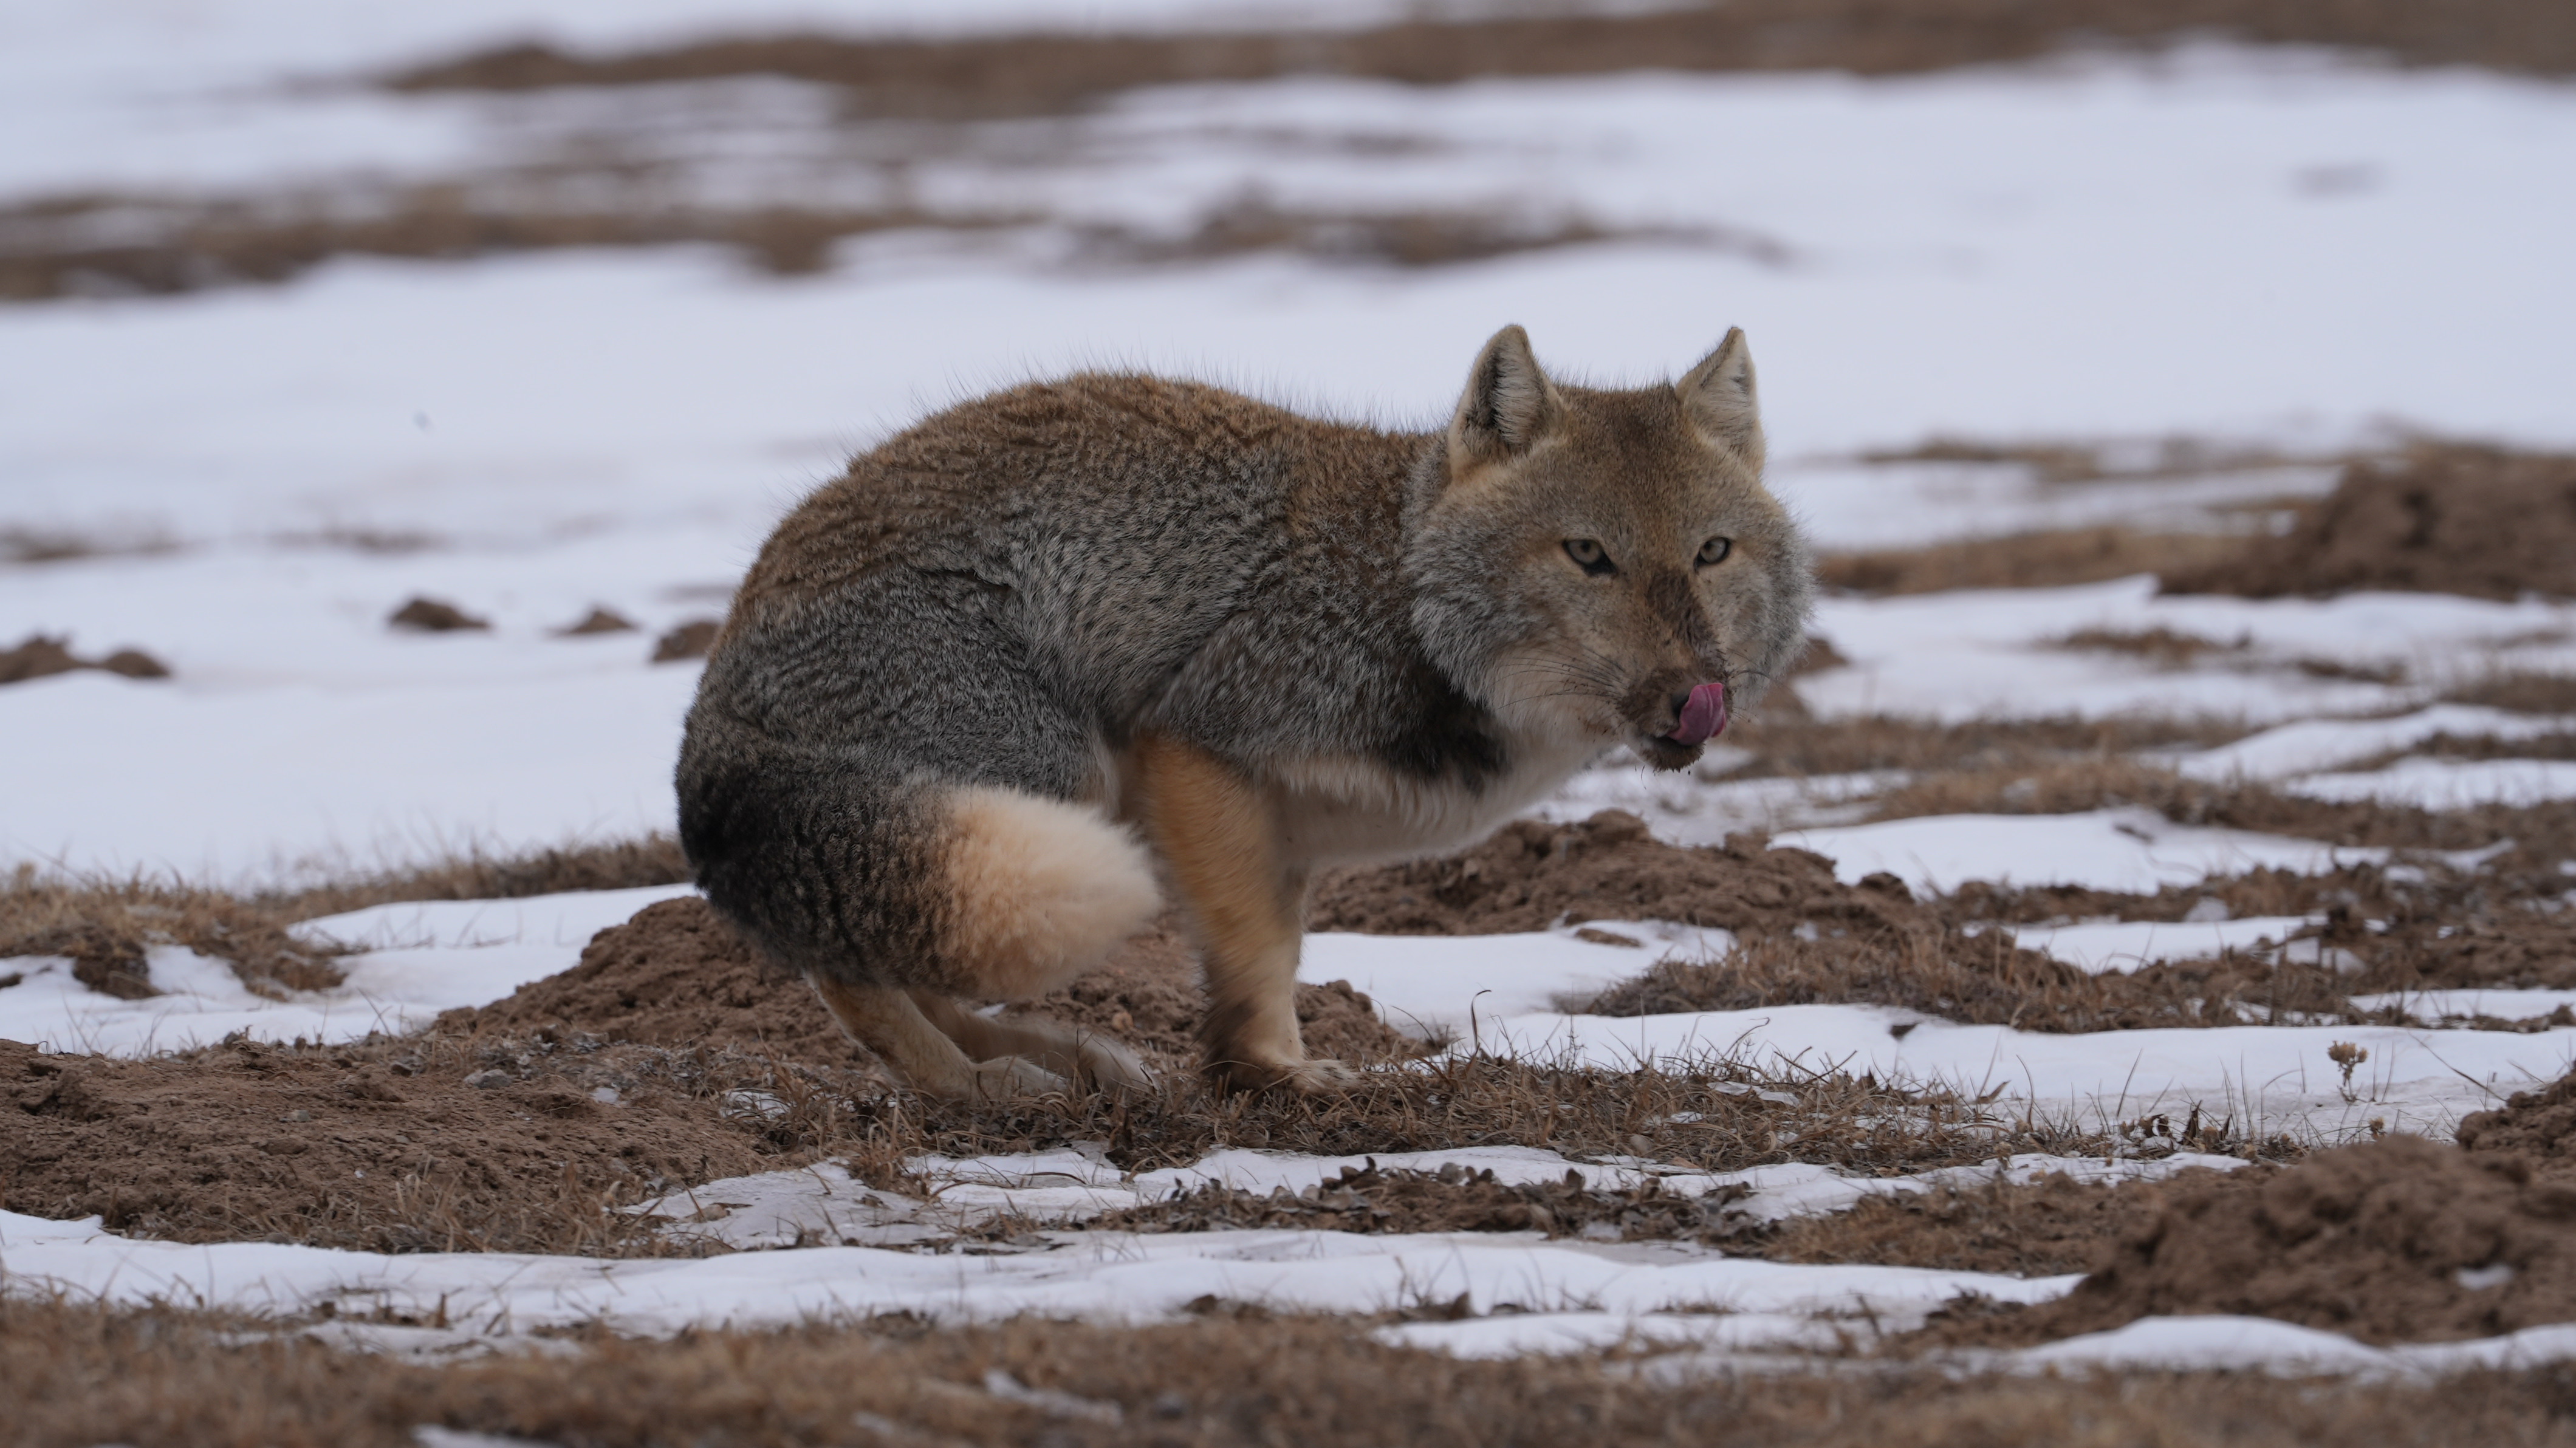 Tibetan fox spotted foraging in NW China's Qinghai